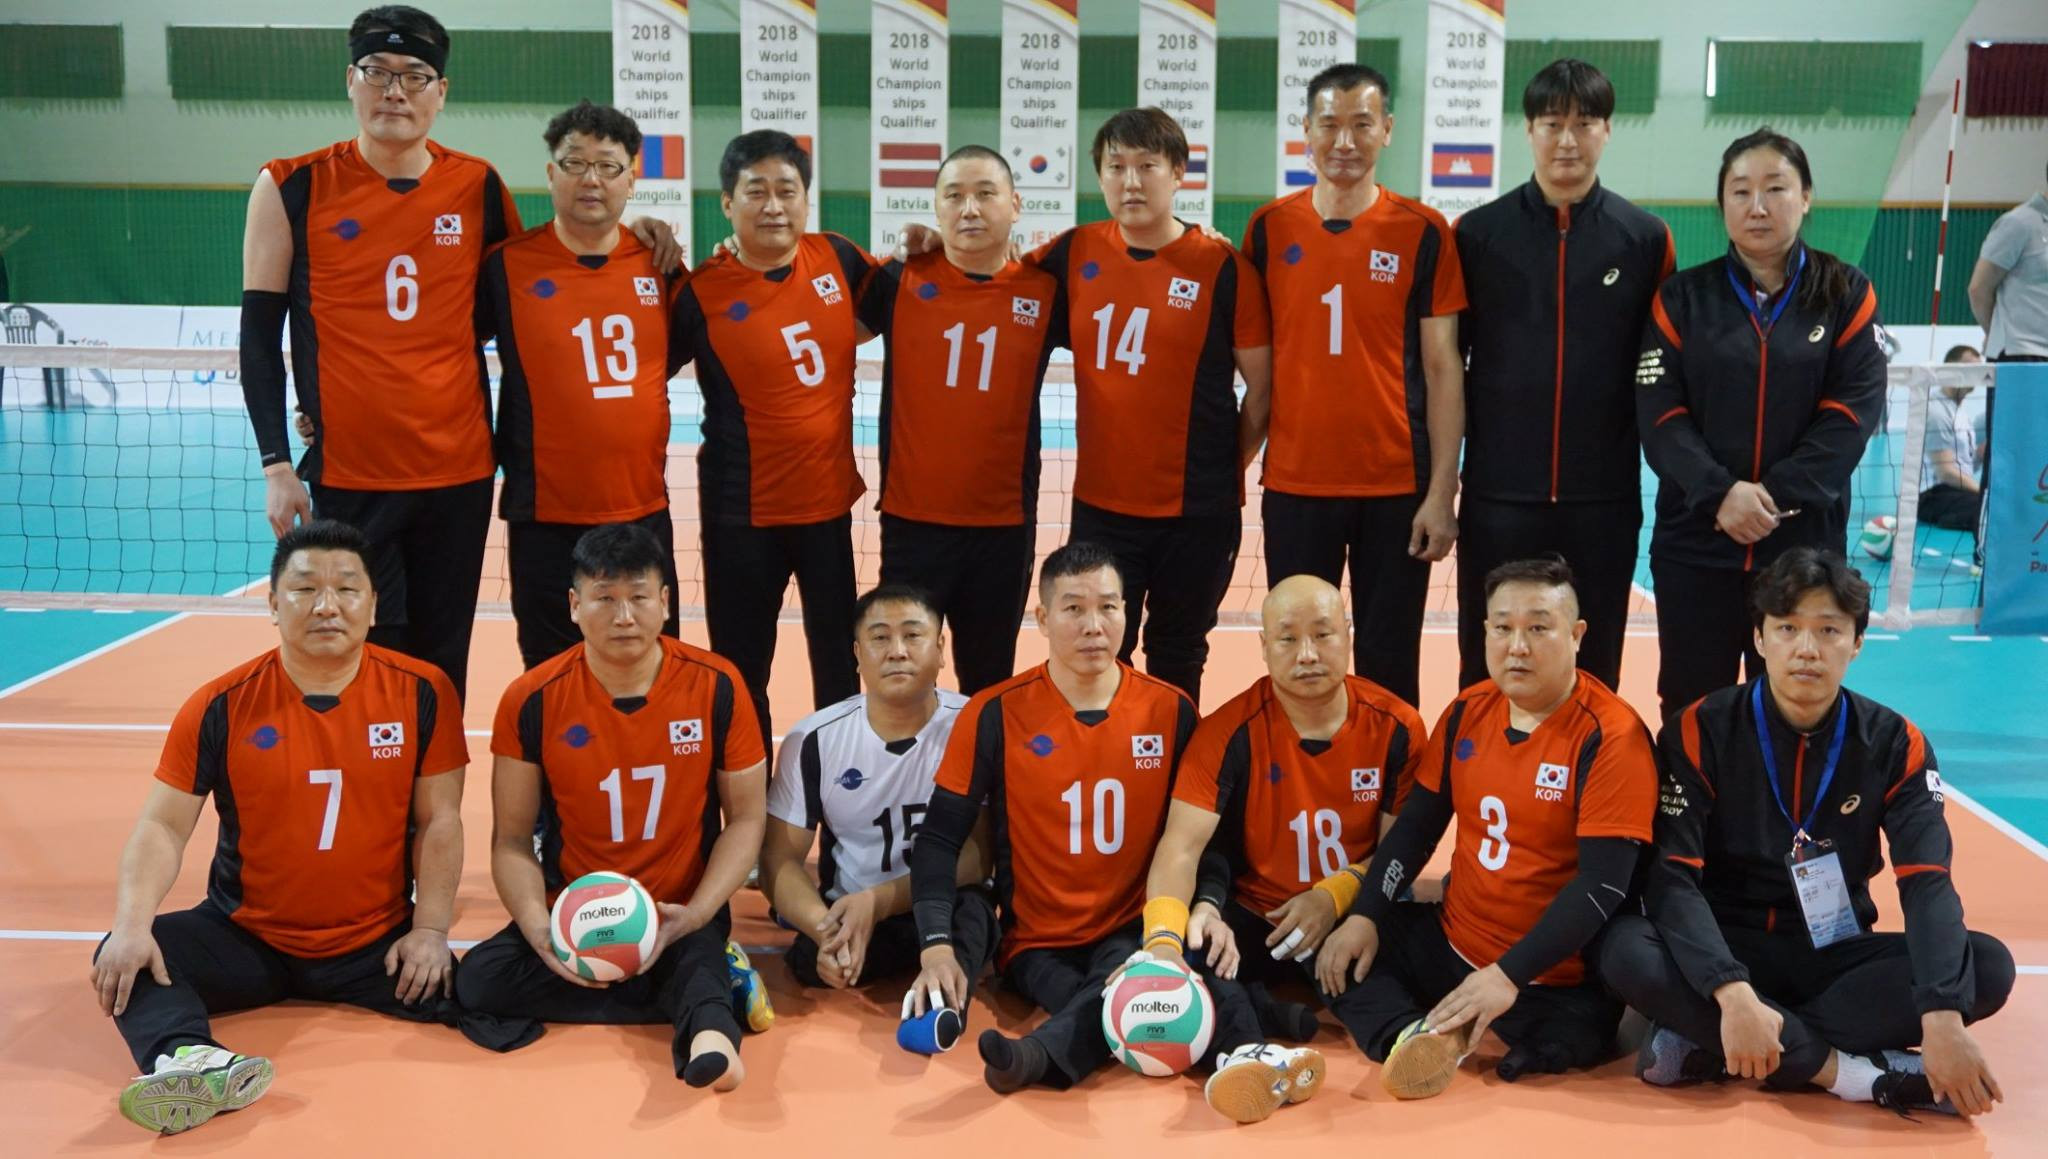 Hosts South Korea made a winning start to their Pool A campaign at the final qualification tournament for the 2018 Sitting Volleyball World Championships in Jeju ©World ParaVolley/Facebook